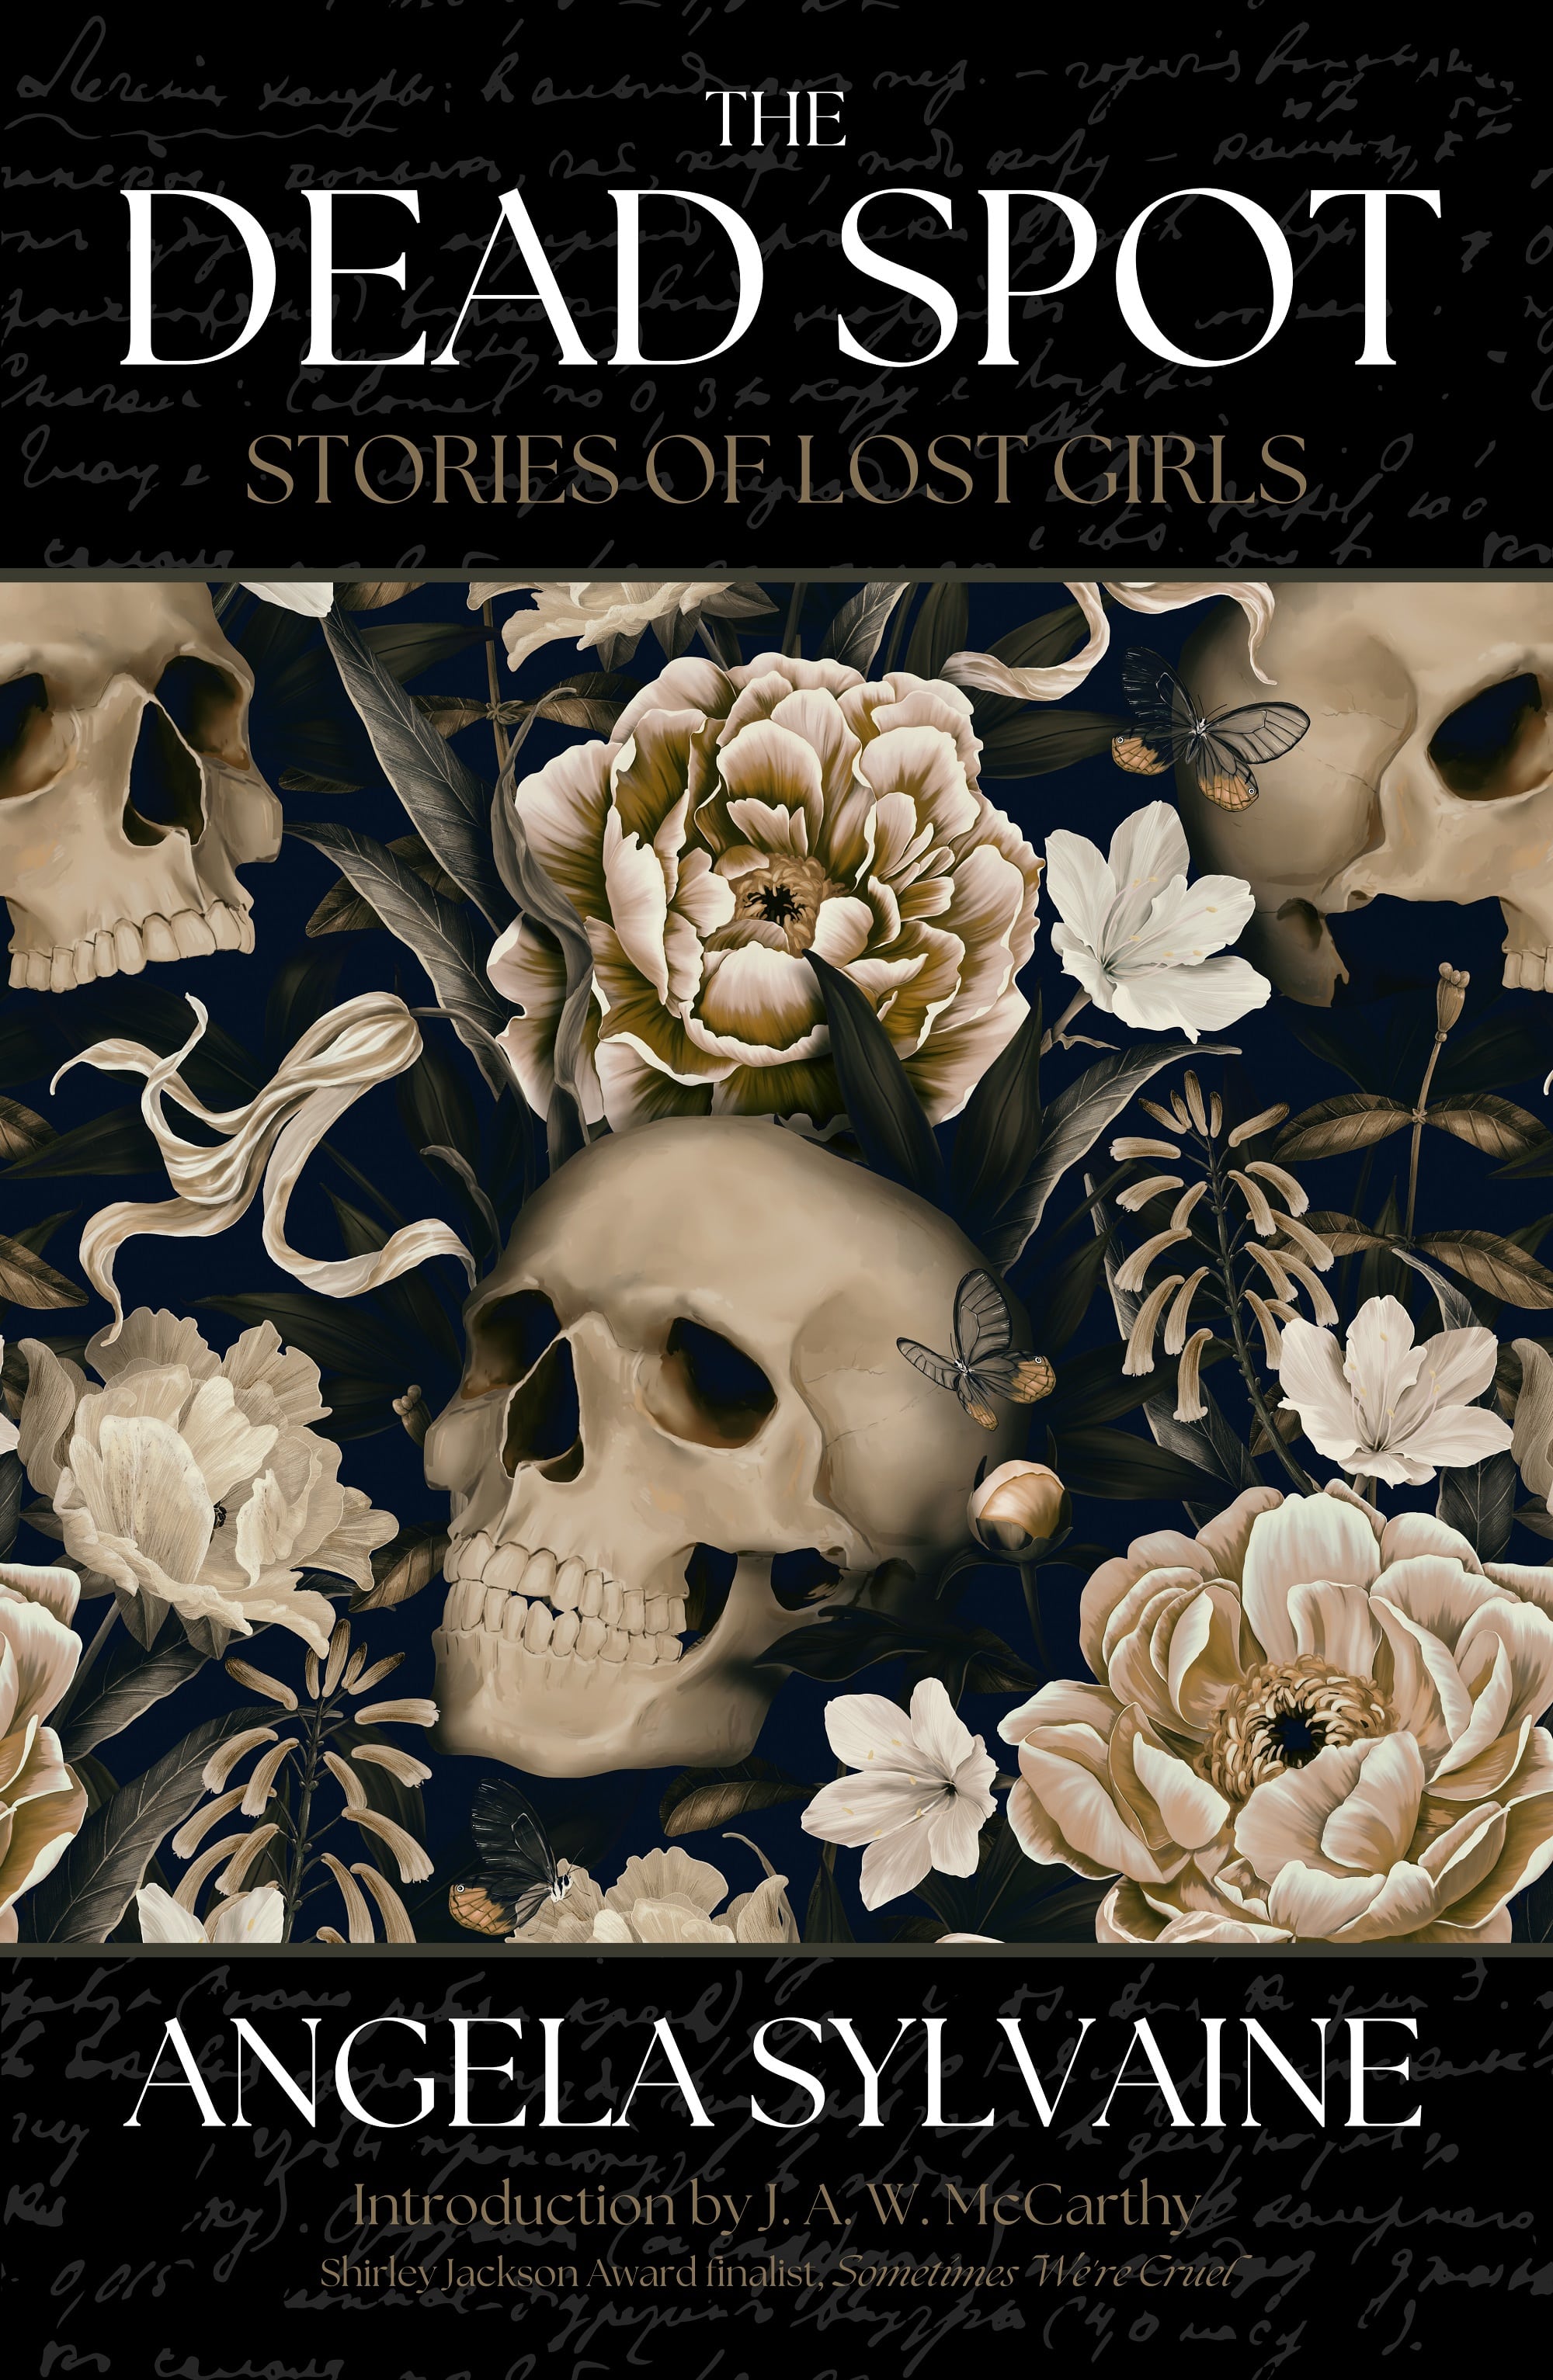 The Dead Spot: Stories of Lost Girls